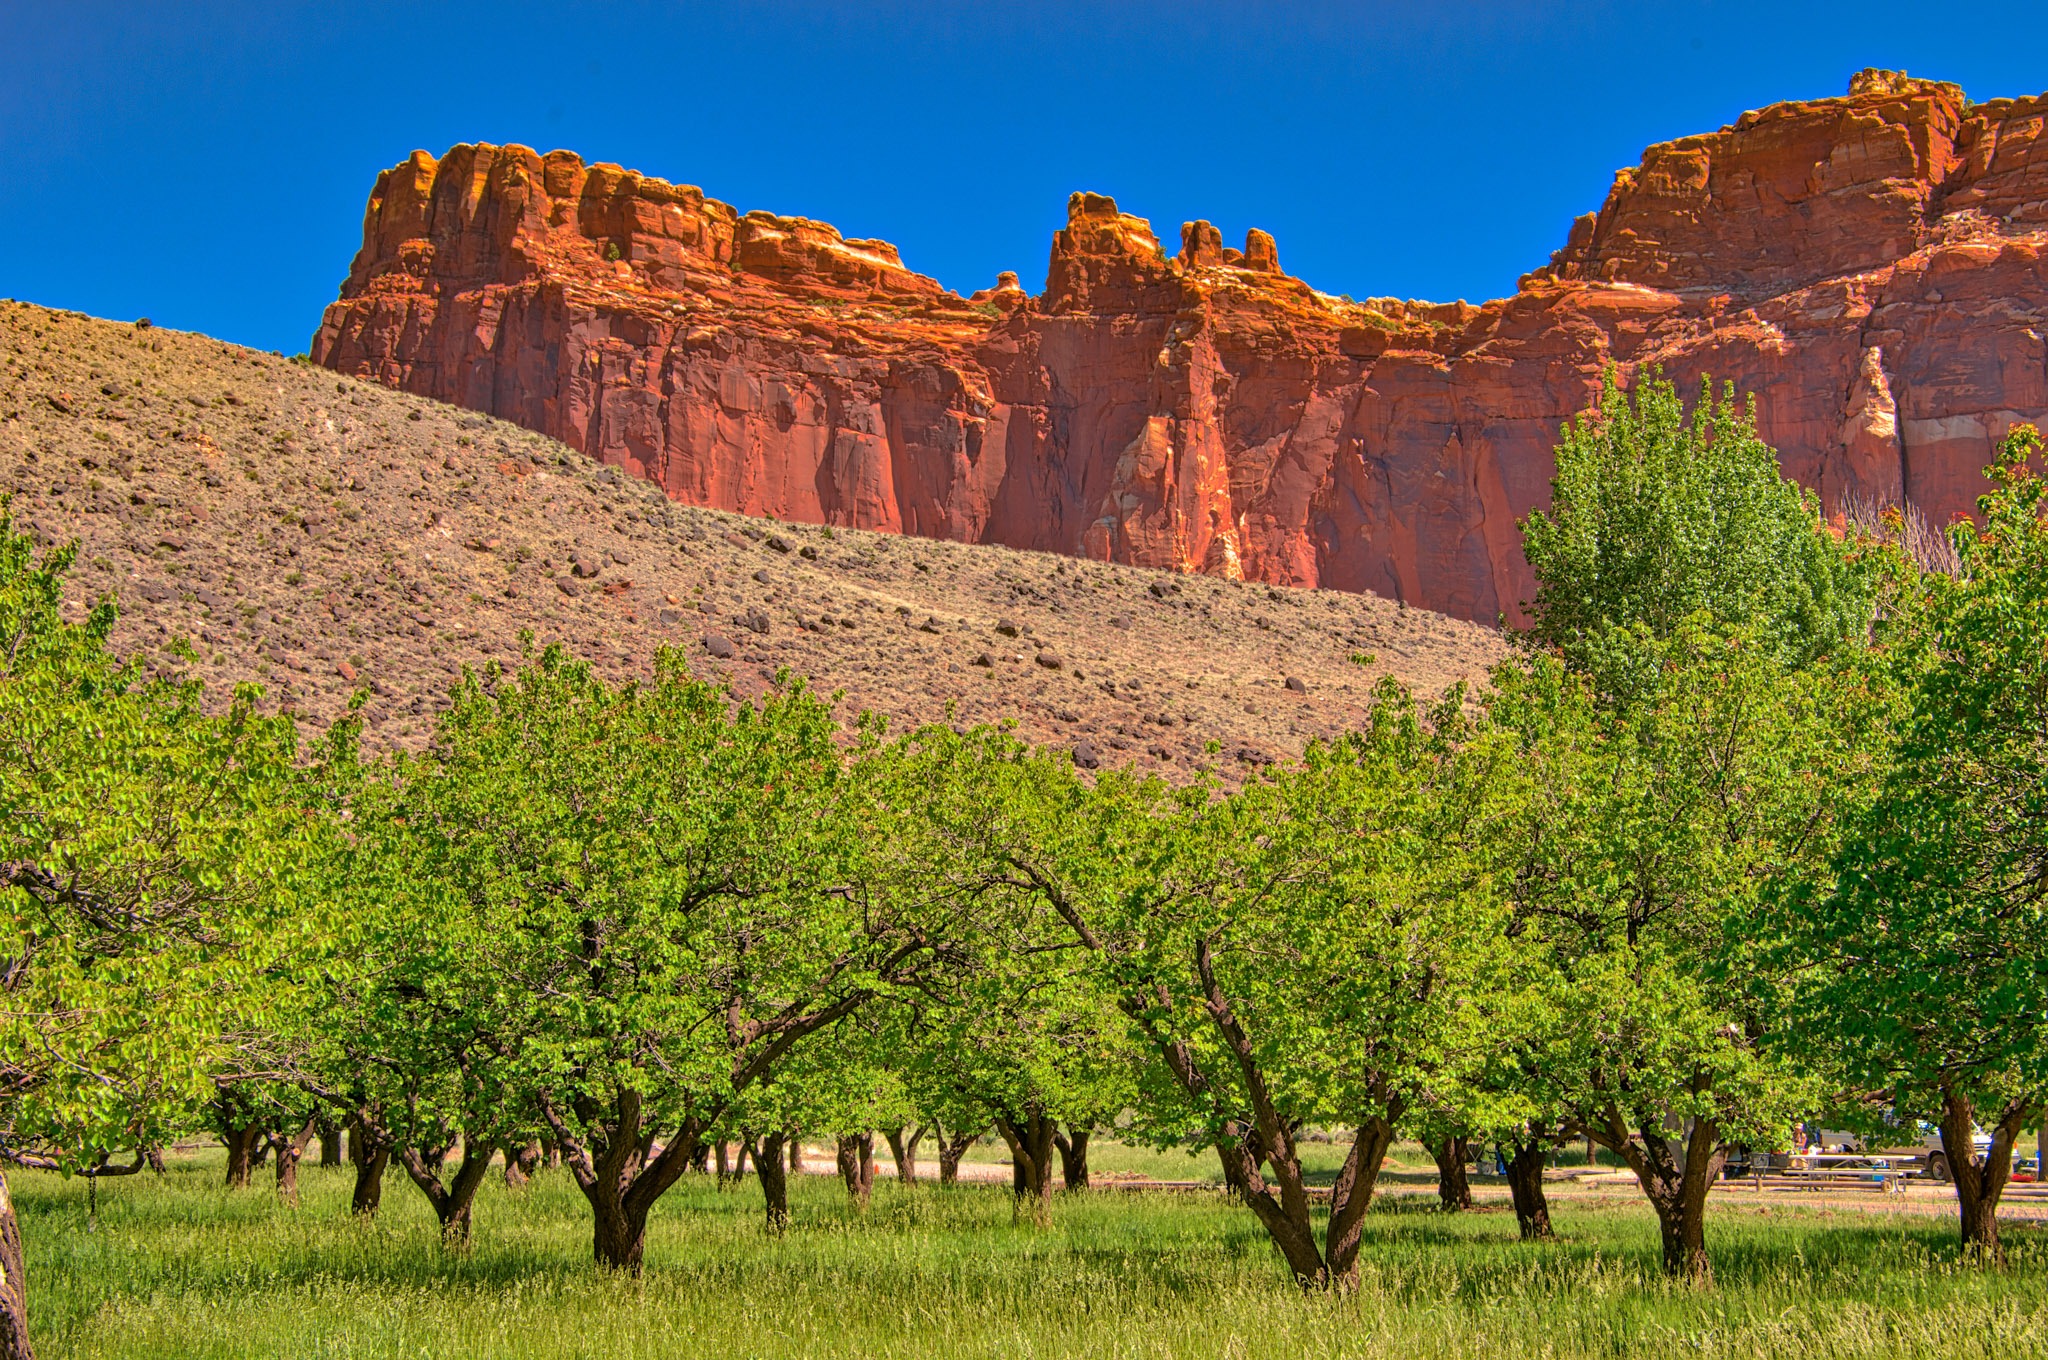 This is a view of some fruit trees in one of the orchards along Camp Ground Road in the Fruita District of Capitol Reef National Park. Some of these heirloom fruit trees are over 100 years old. The National Park Service is maintaining these orchards, replanting trees that have dies of old-age withthe same heiloom species. The only difference seems to be that they are planting in groups of similar species, such as cherries with cherries and peaches with peaches.